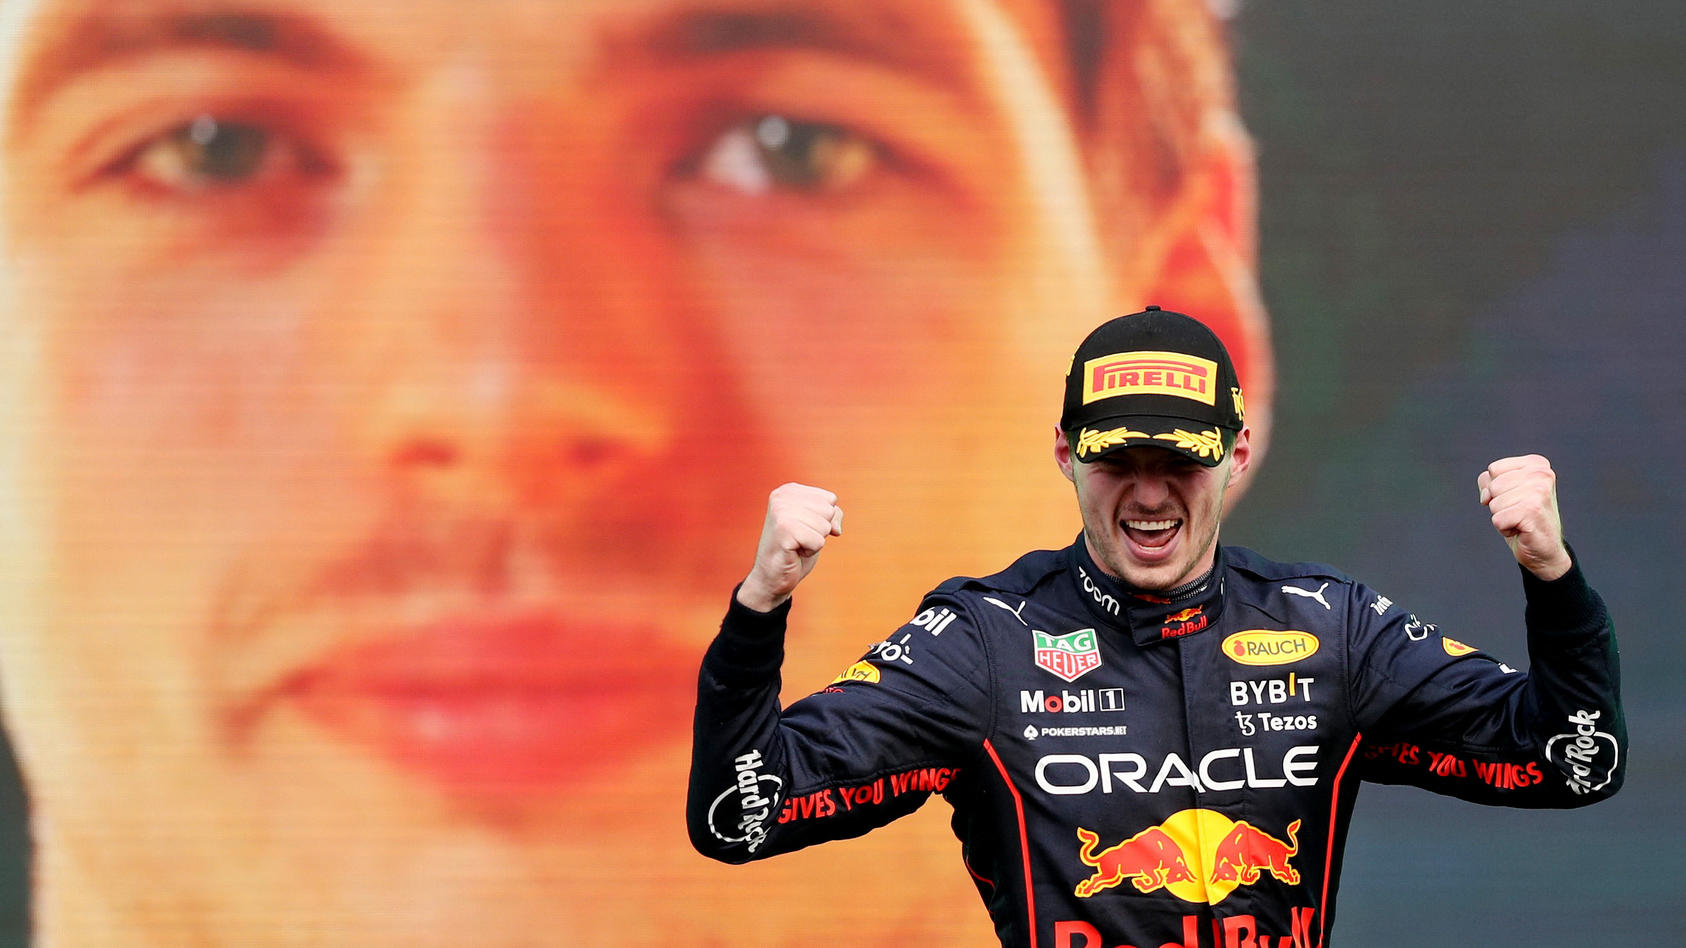 Formula One F1 - Mexico City Grand Prix - Autodromo Hermanos Rodriguez, Mexico City, Mexico - October 30, 2022 Red Bull's Max Verstappen celebrates on the podium after winning the race and setting a new F1 record of 14 grand prix wins in a season REU